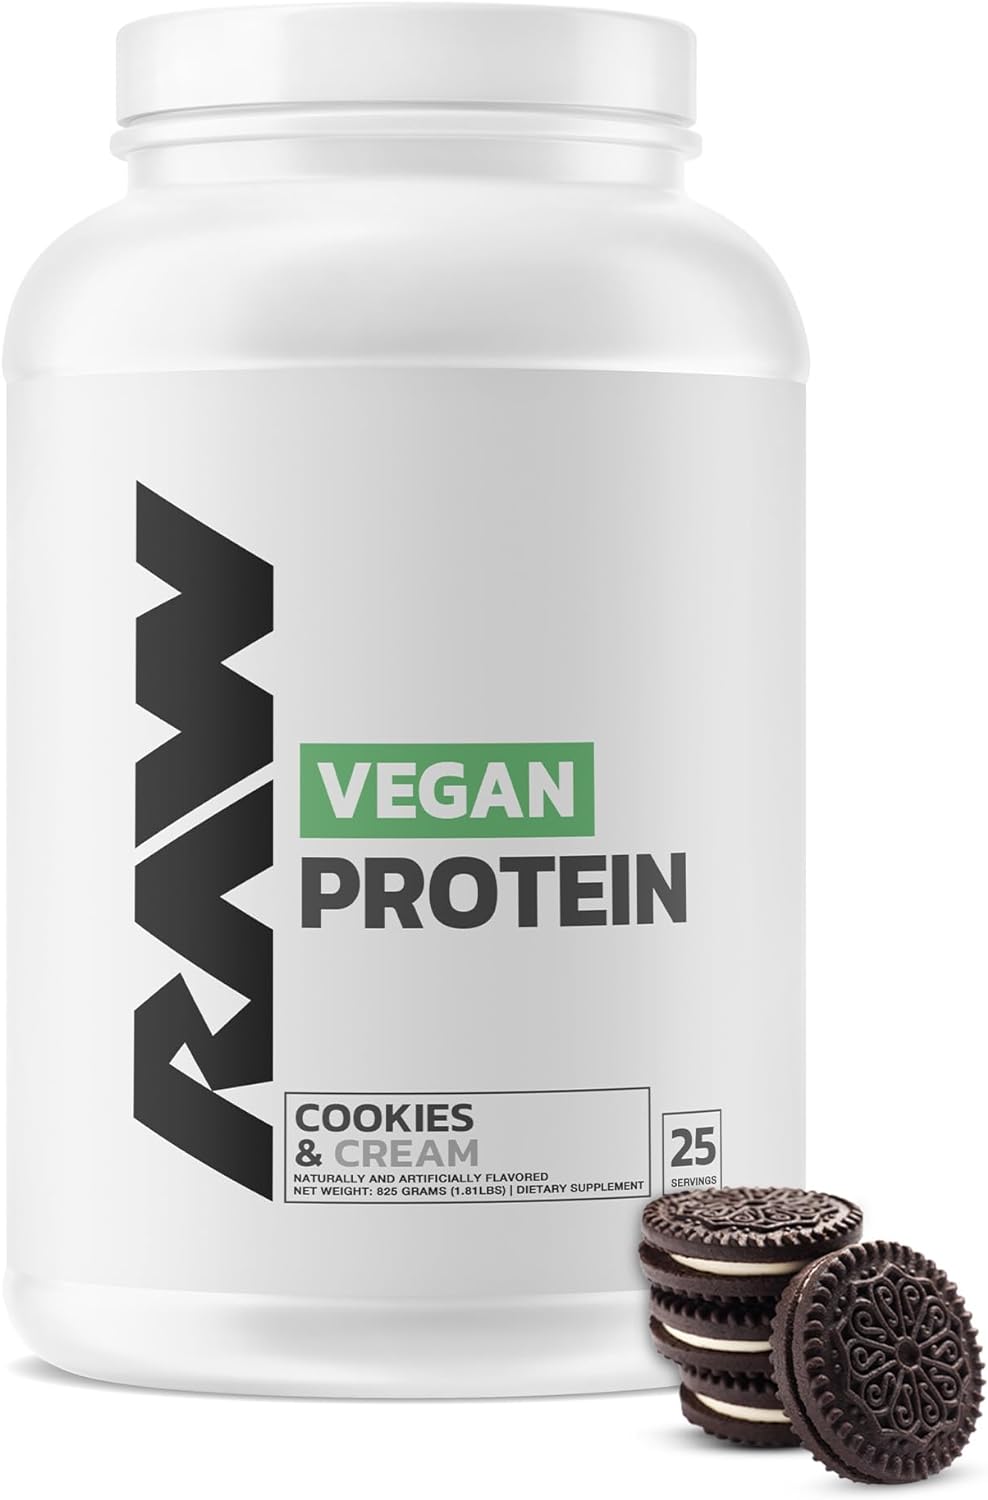 RAW Vegan Protein Powder, Cookies N Cream - 20g of Plant-Based Protein Powder & Fortified with Vitamins for Muscle Growth & Recovery - Low-Fat, Low Carb, Naturally Flavored & Sweetened - 25 Servings